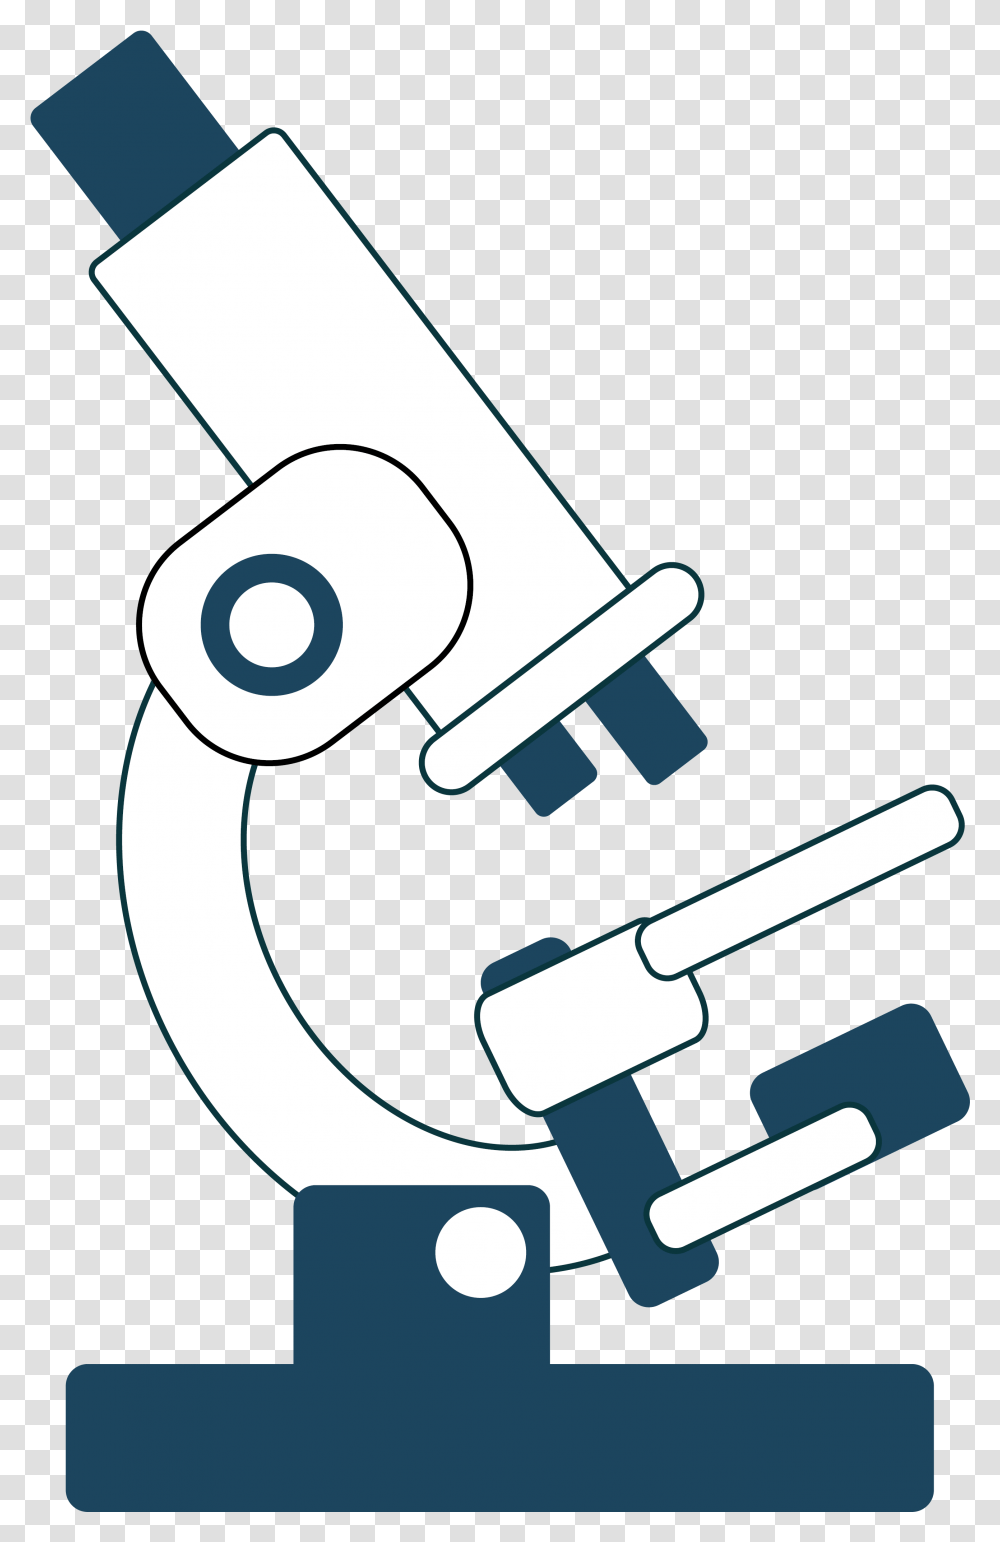 Diseases Such As Cancer Heart Disease Background Microscope Clip Art, Adapter, Hammer, Tool, Plug Transparent Png